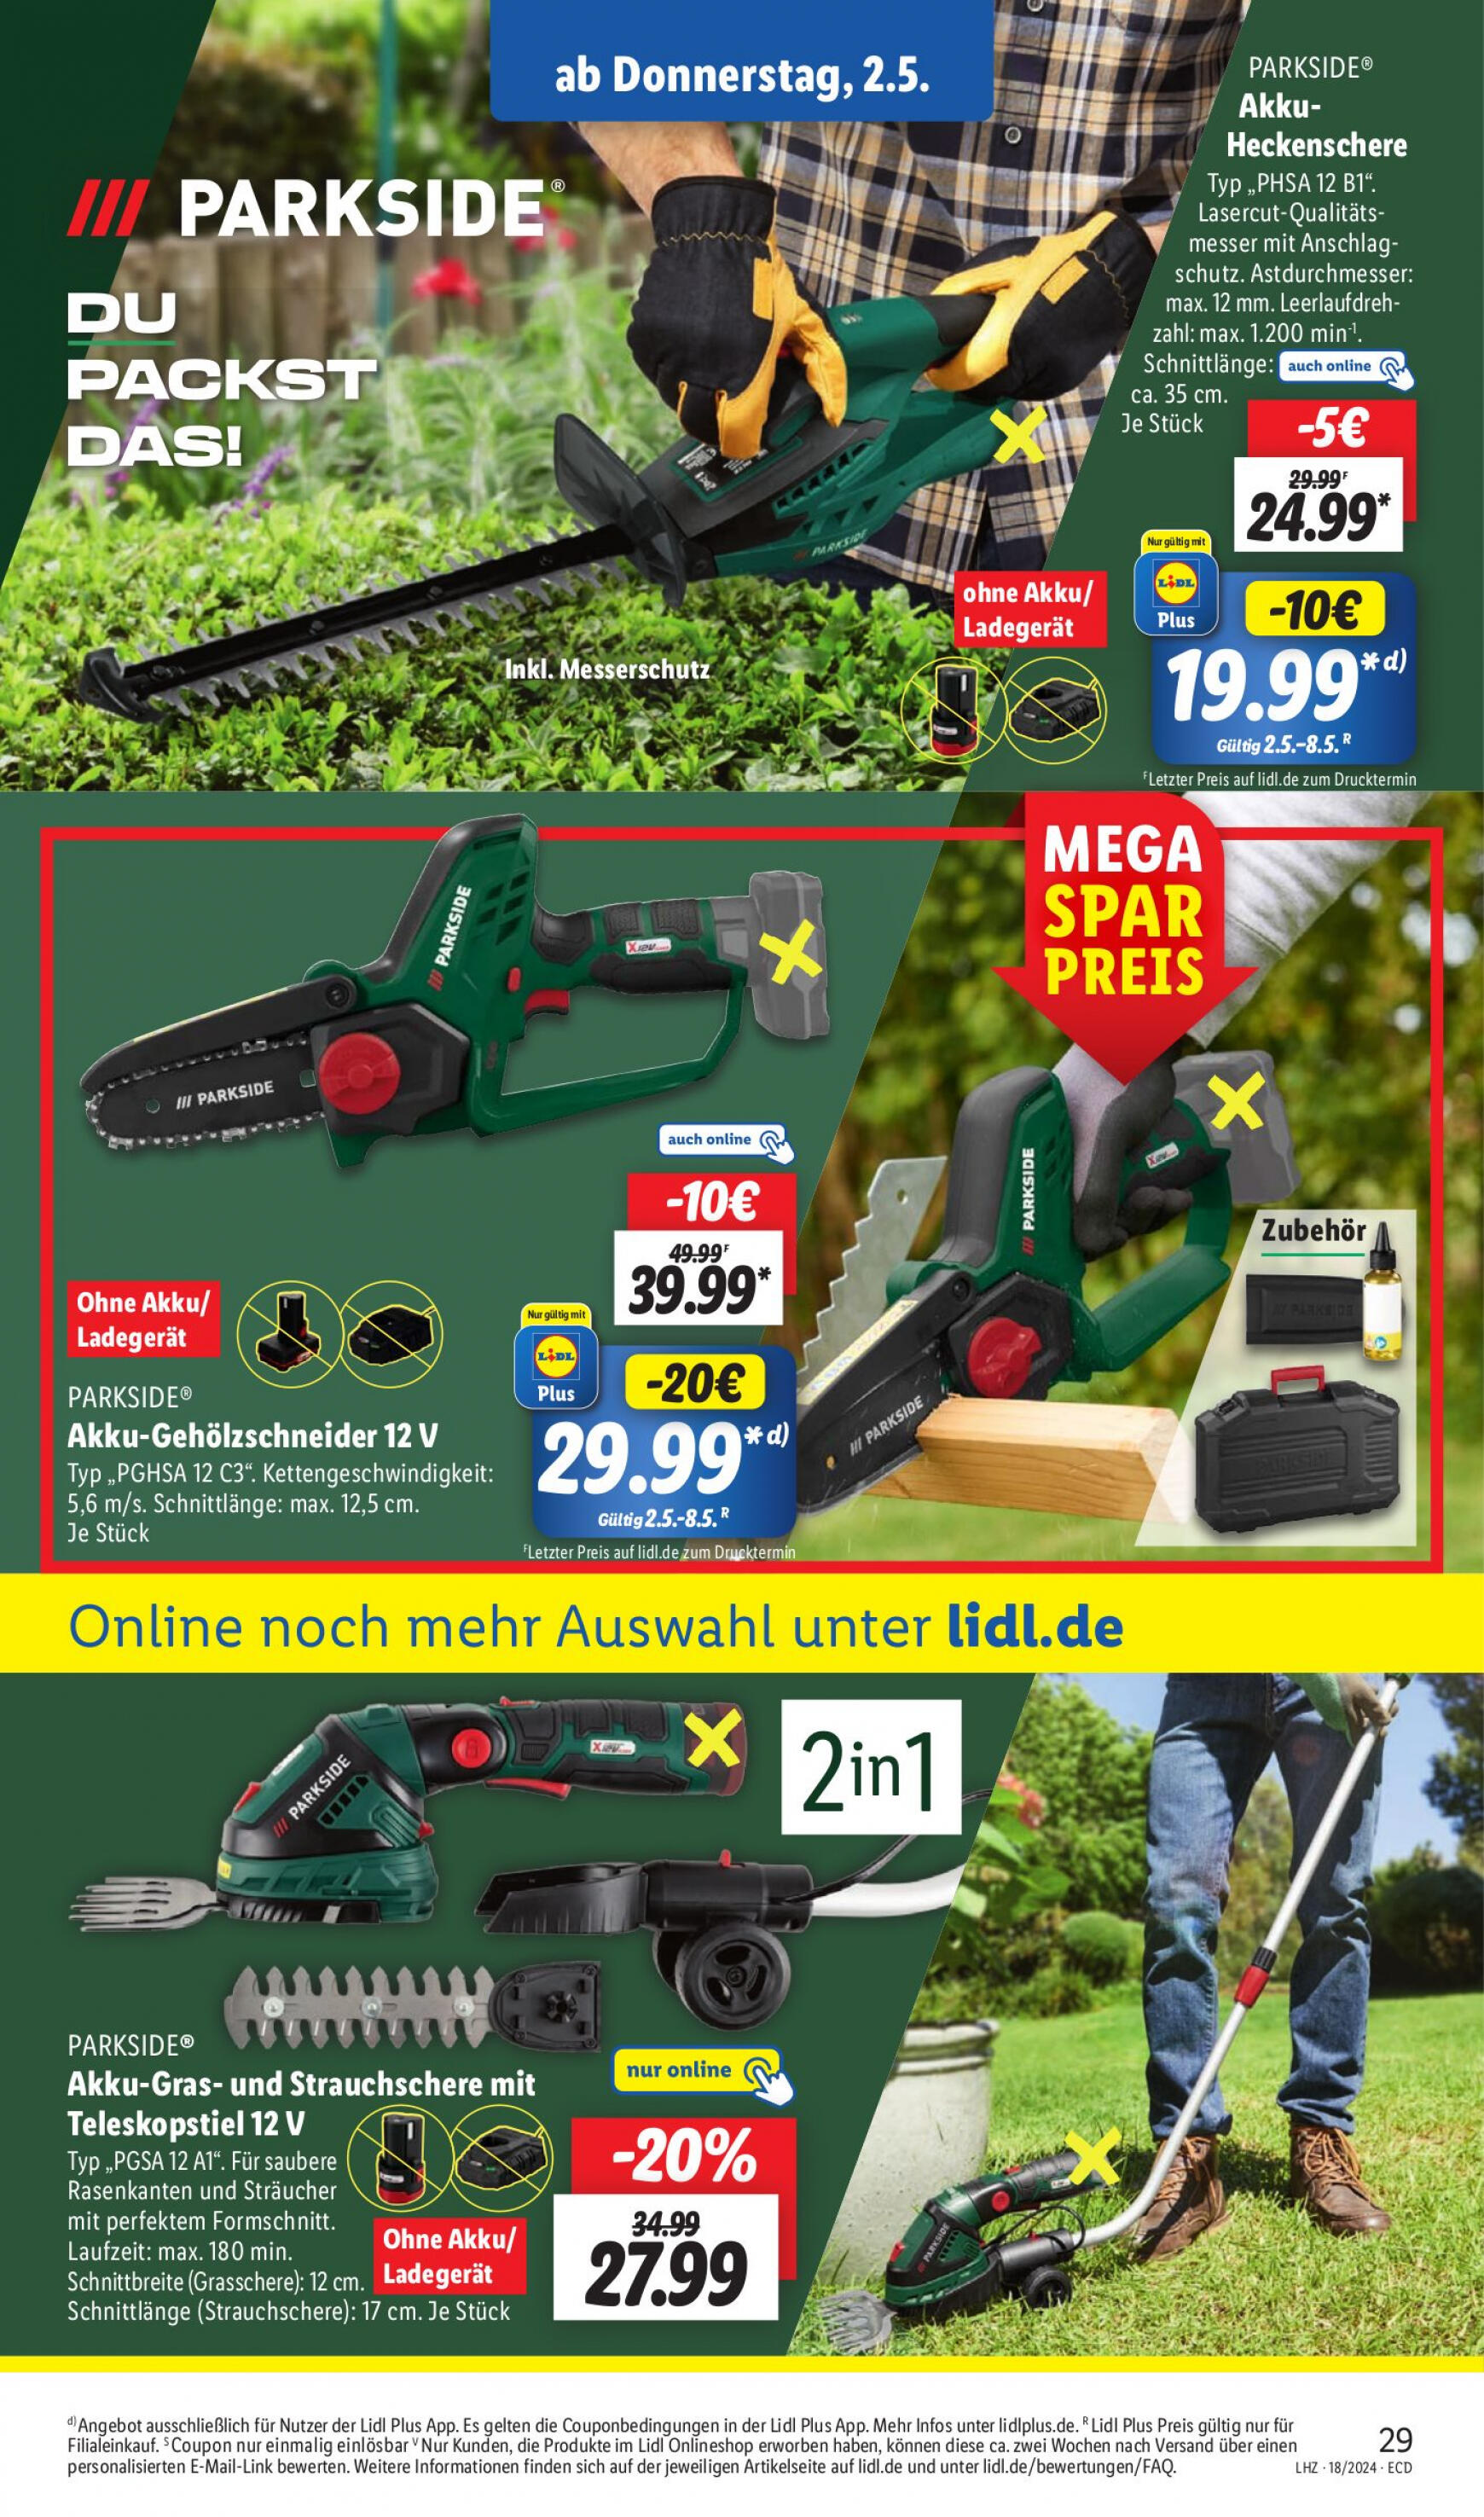 lidl - Flyer Lidl aktuell 29.04. - 04.05. - page: 33